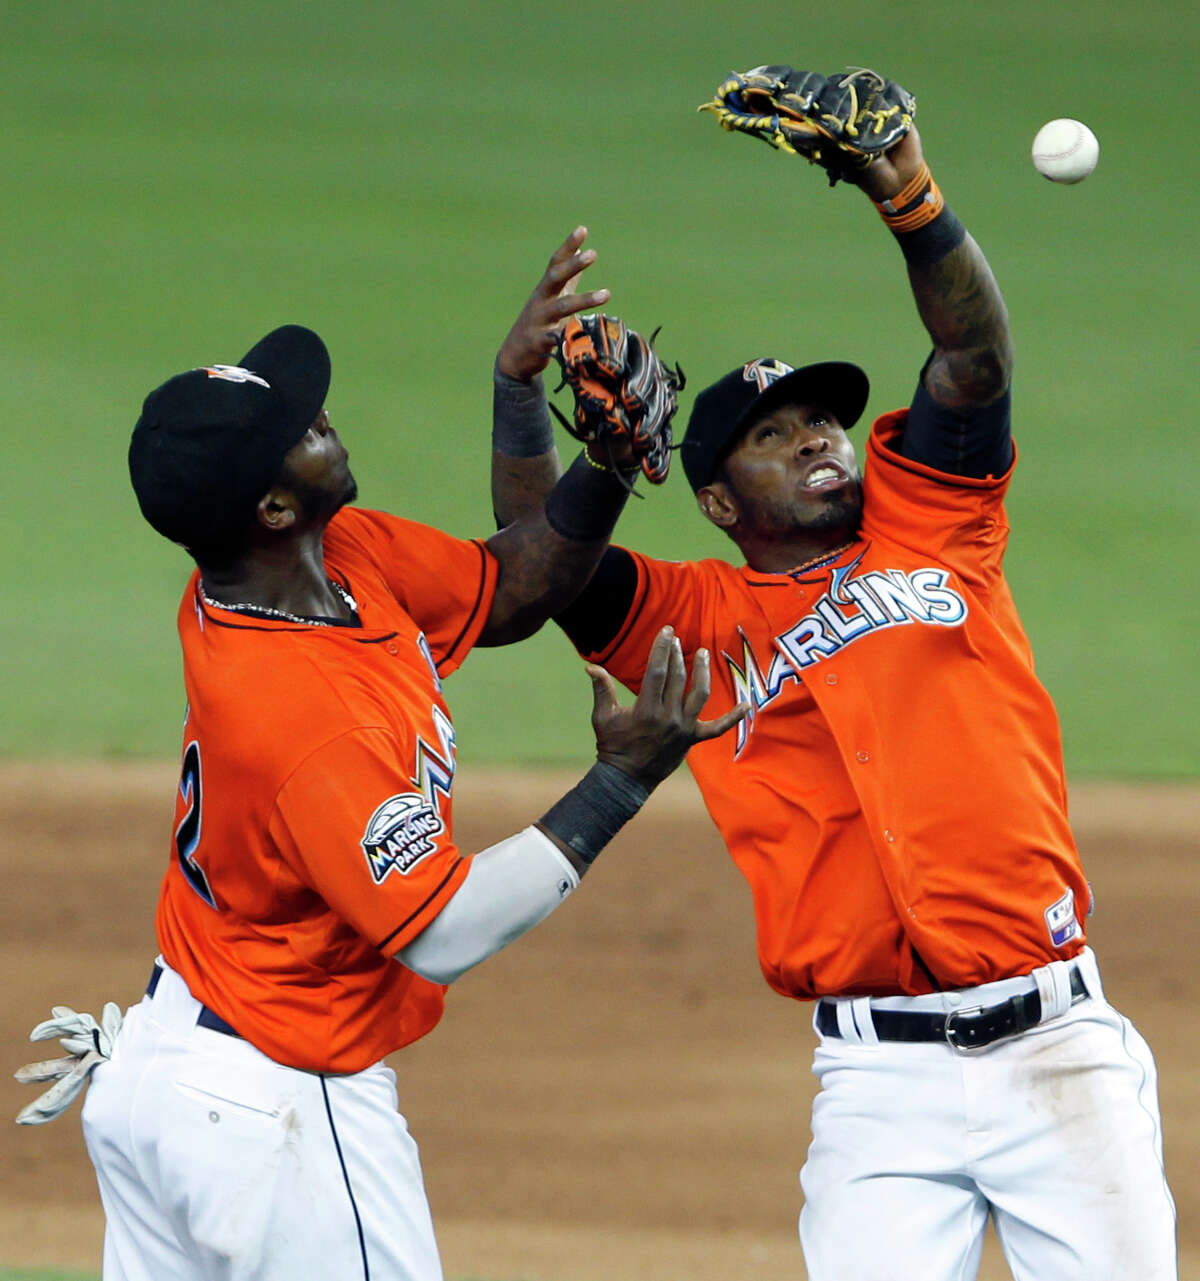 Miami Marlins third baseman Hanley Ramirez, left, and shortstop Jose Reyes bobble a ball hit by Houston Astros' Jordan Schafer during the inning 11th of a baseball game on Sunday, April 15, 2012, in Miami. The Marlins defeated the Astros 5-4 in 11 innings. (AP Photo/Wilfredo Lee)